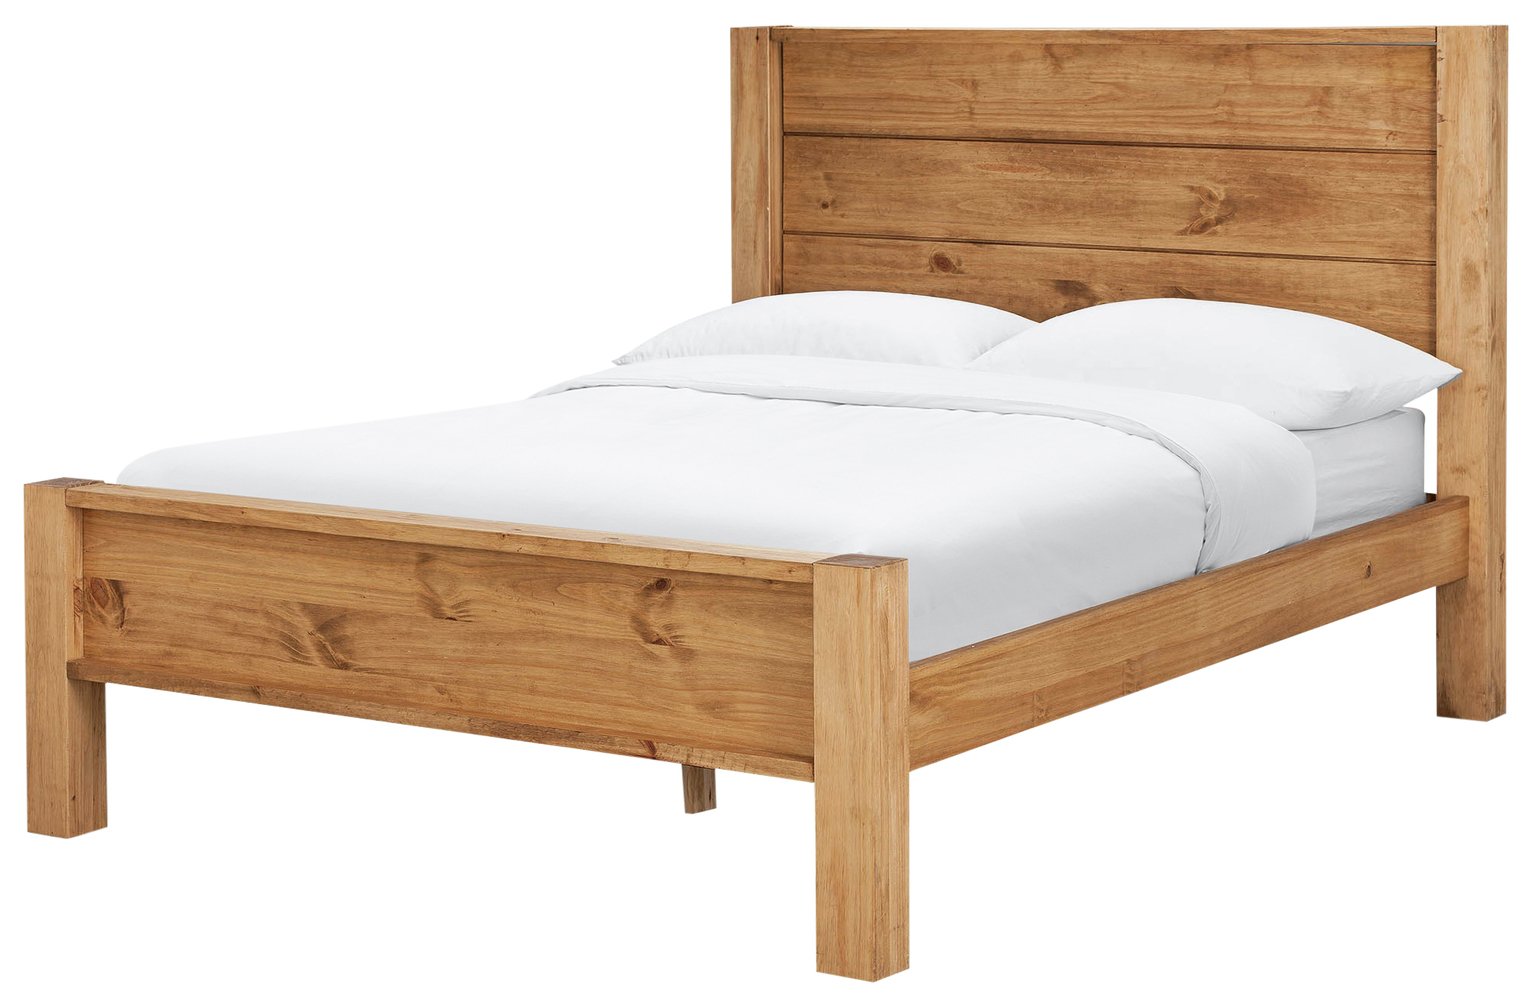 Argos Home Fairfield Double Wooden Bed Frame - Pine